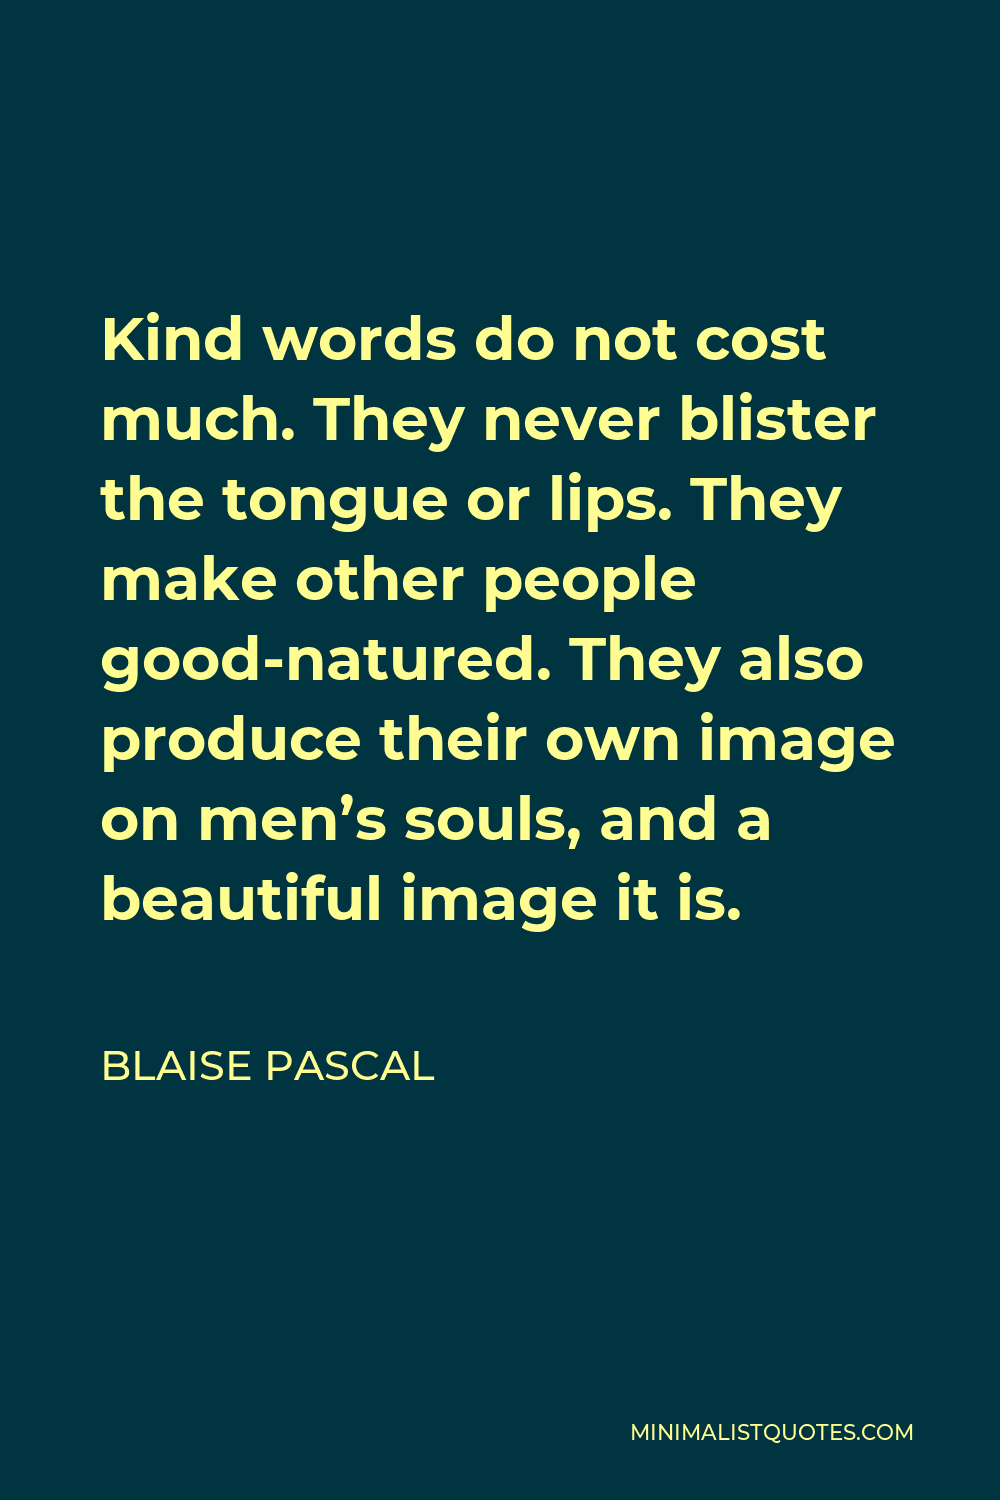 Blaise Pascal Quote - Kind words do not cost much. They never blister the tongue or lips. They make other people good-natured. They also produce their own image on men’s souls, and a beautiful image it is.